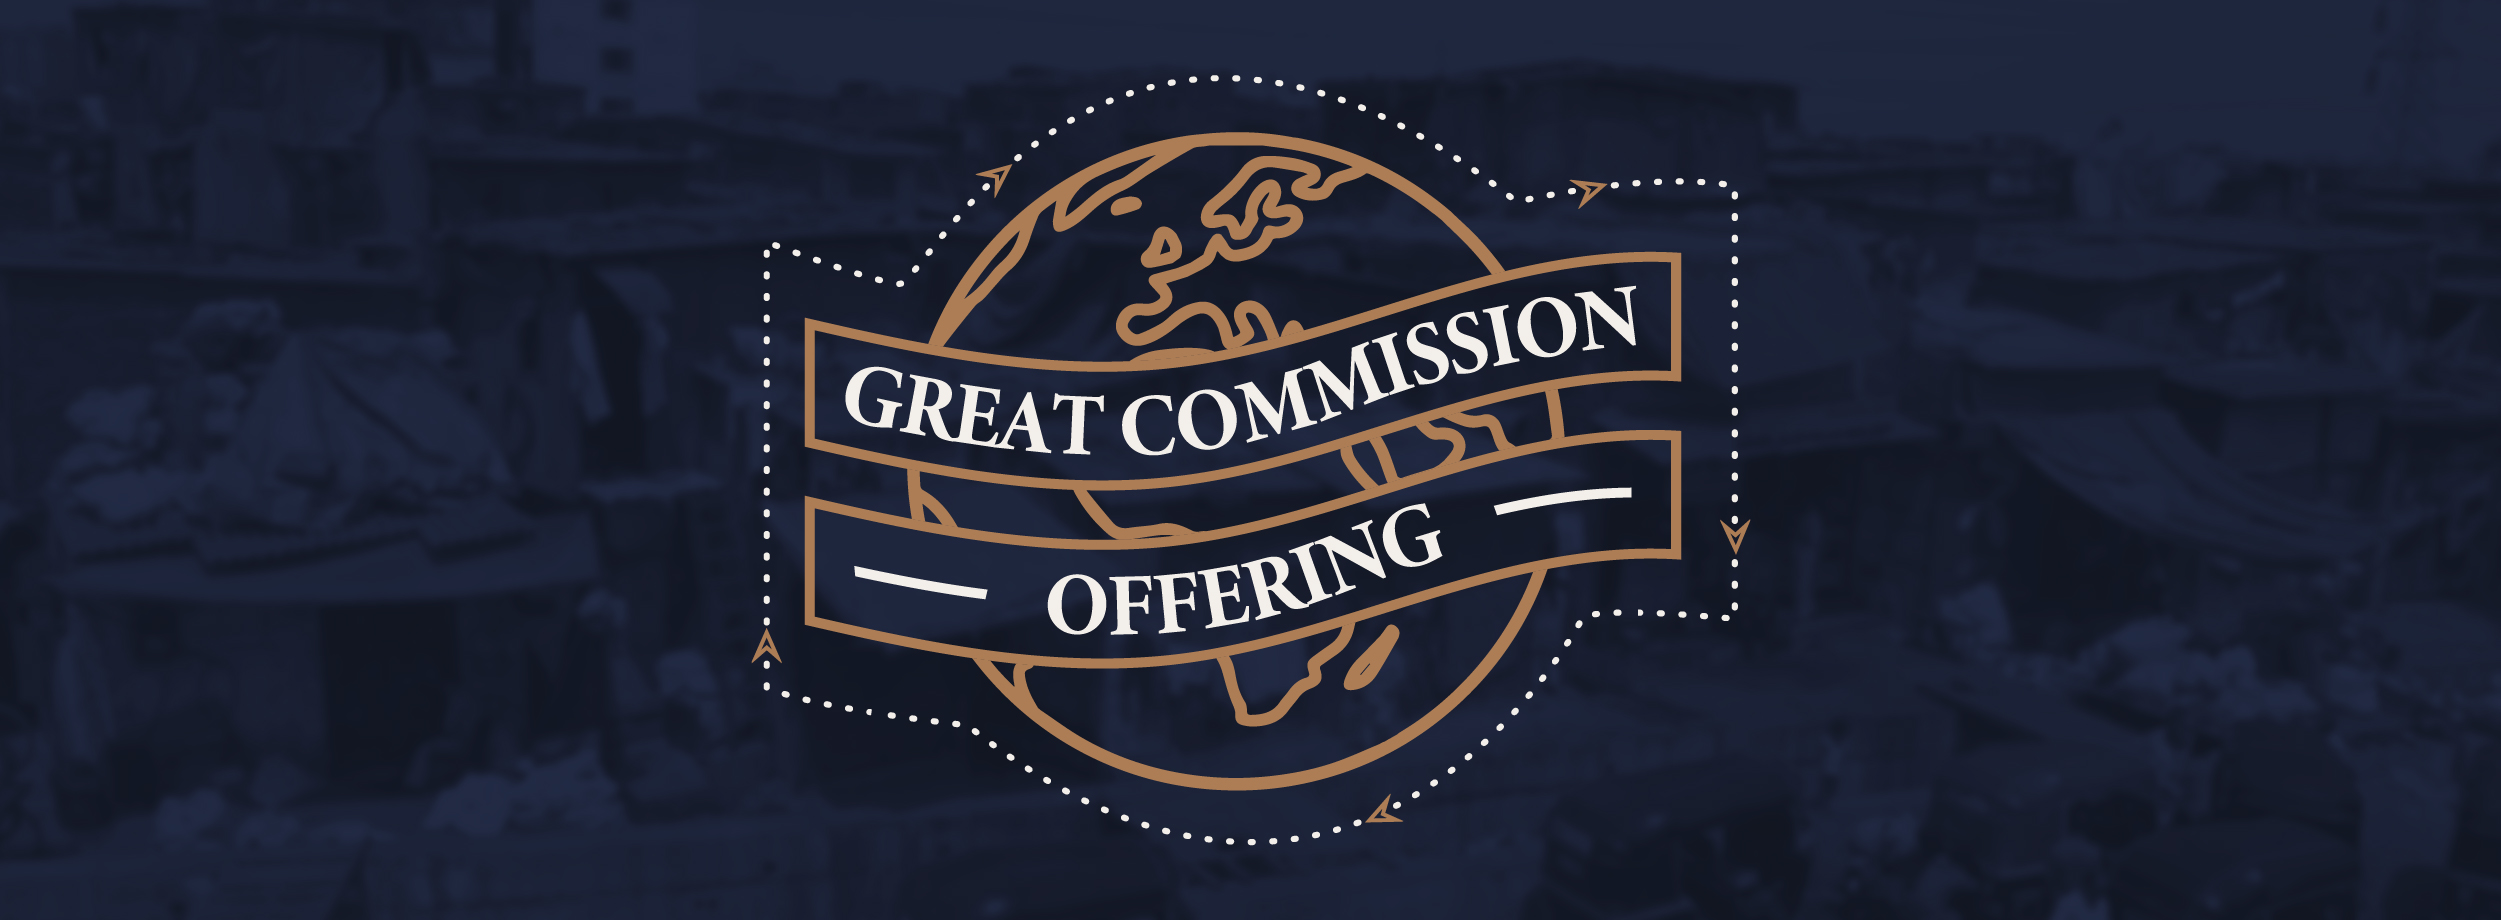 Great Commission Offering